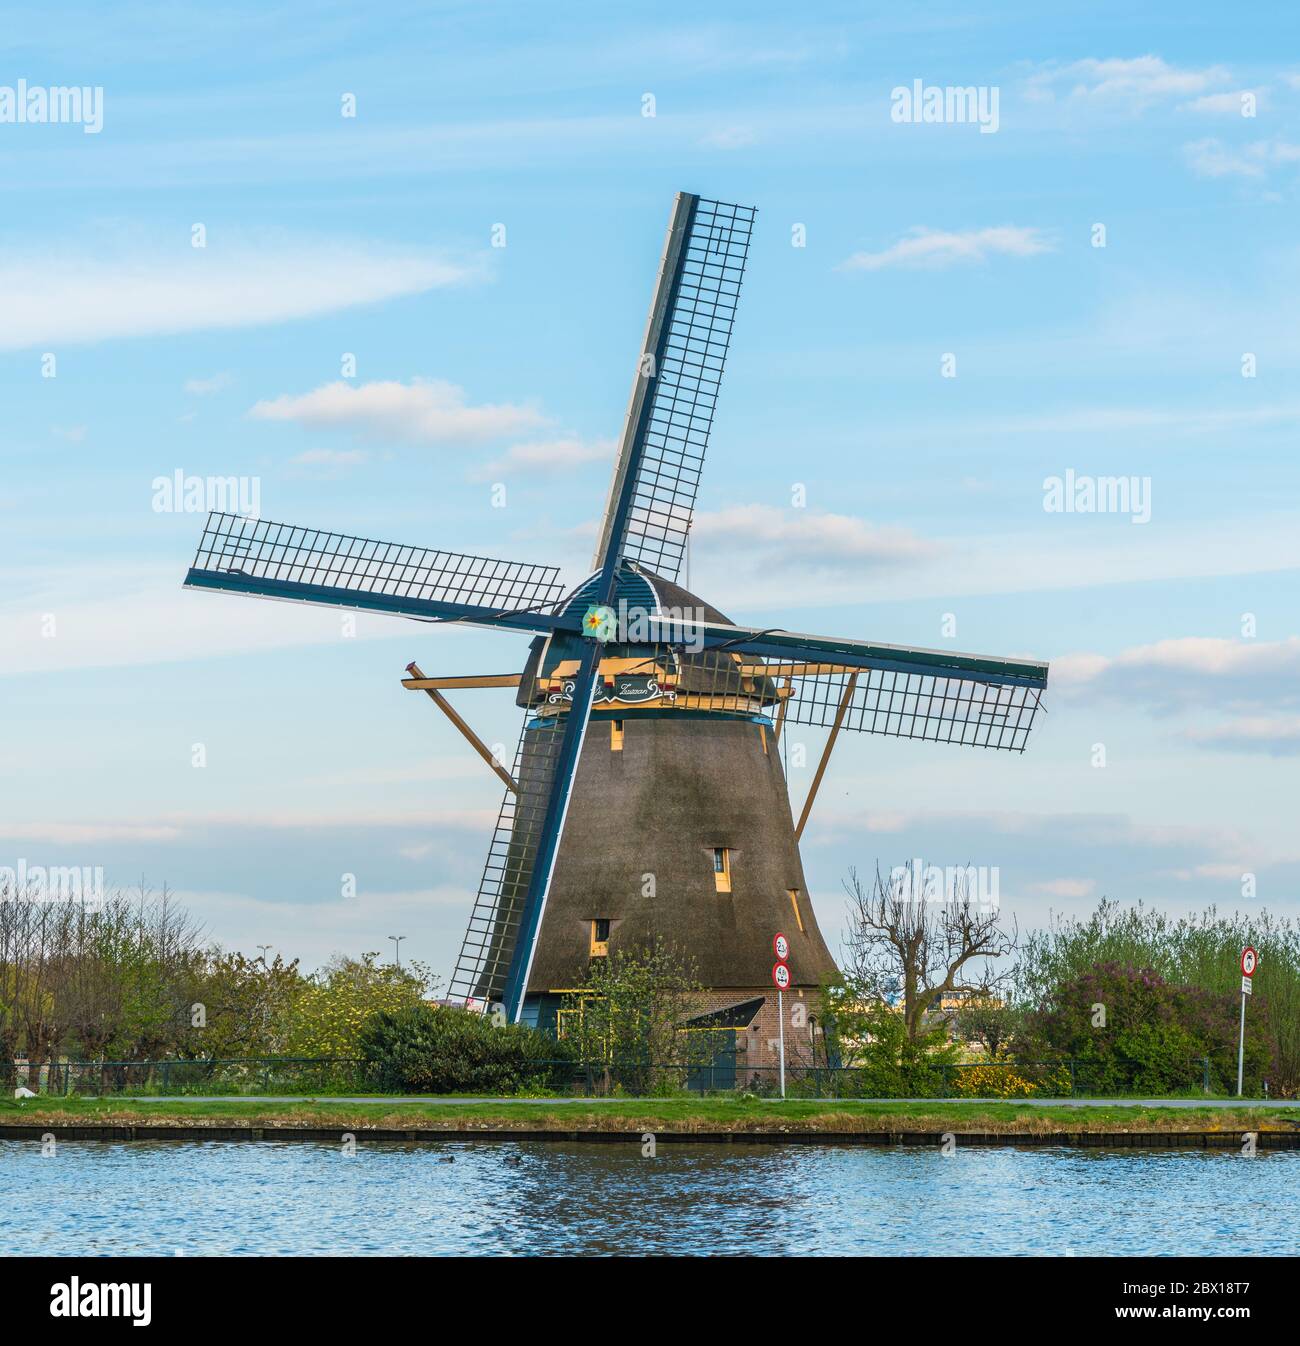 Ouderker aan de Amstel, The Netherlands, April 19, 2017: Authentic Dutch Windmill The Zwaan at the Amstel river near Amsterdam Stock Photo